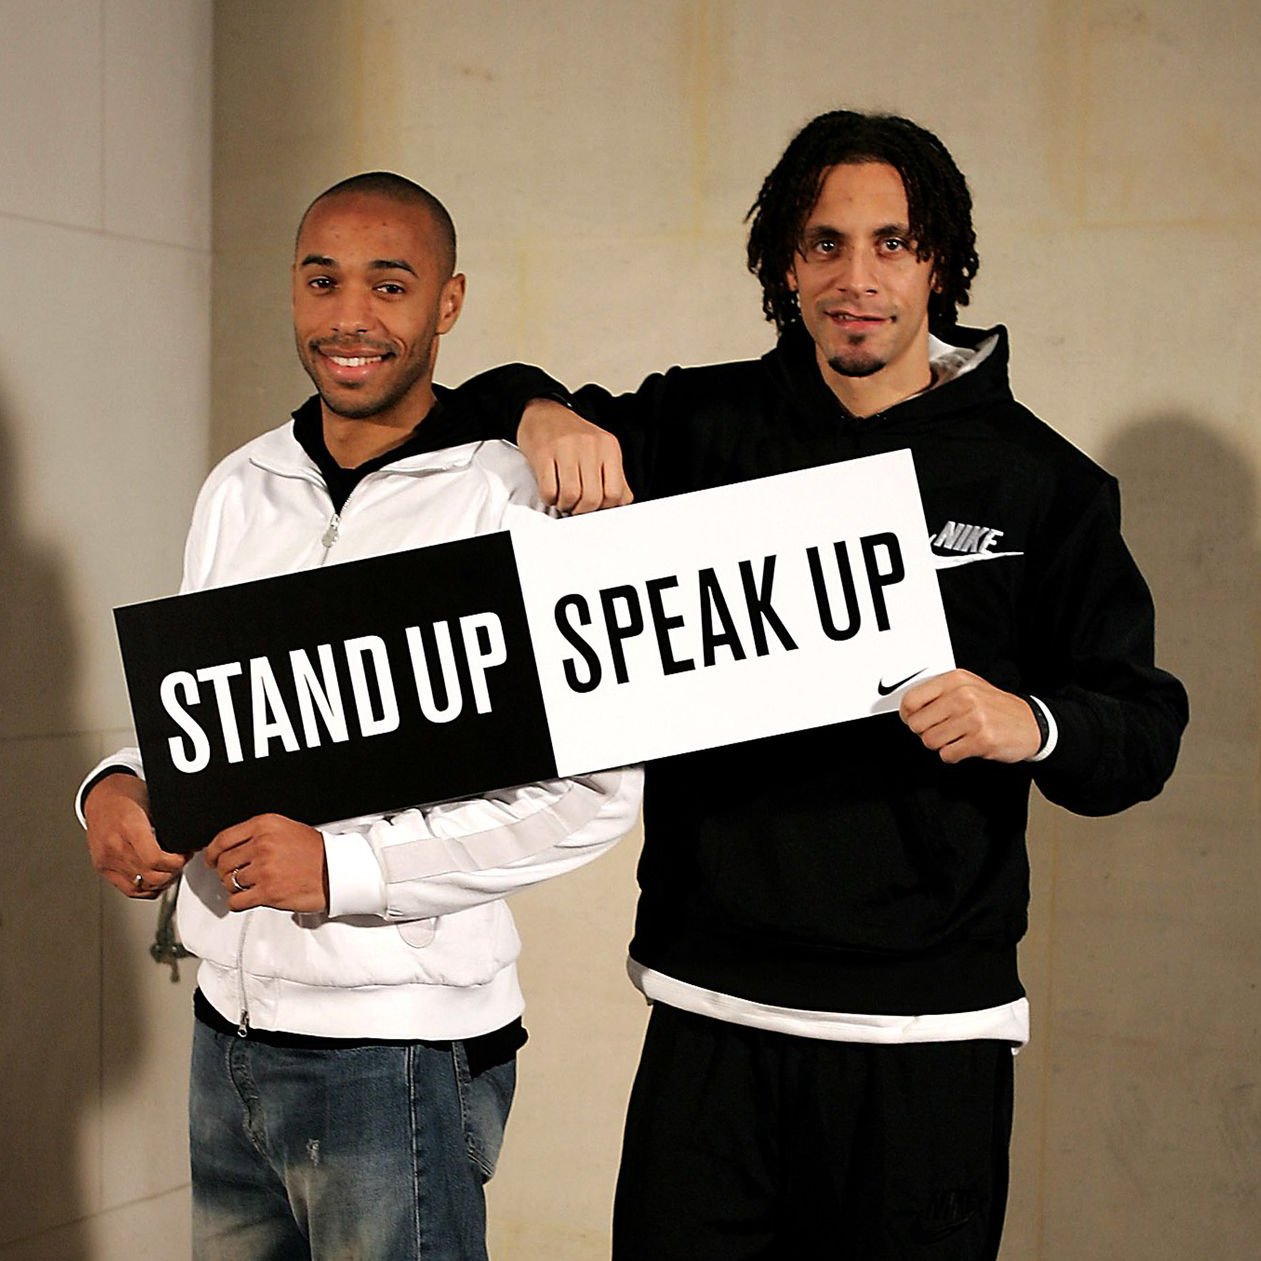 Conejo Pickering Cantina Classic Football Shirts on Twitter: "Nike Stand Up Speak Up Campaign A  campaign launched in 2005 by Thierry Henry following an increase in racist  incidents in football across Europe. Nike international teams